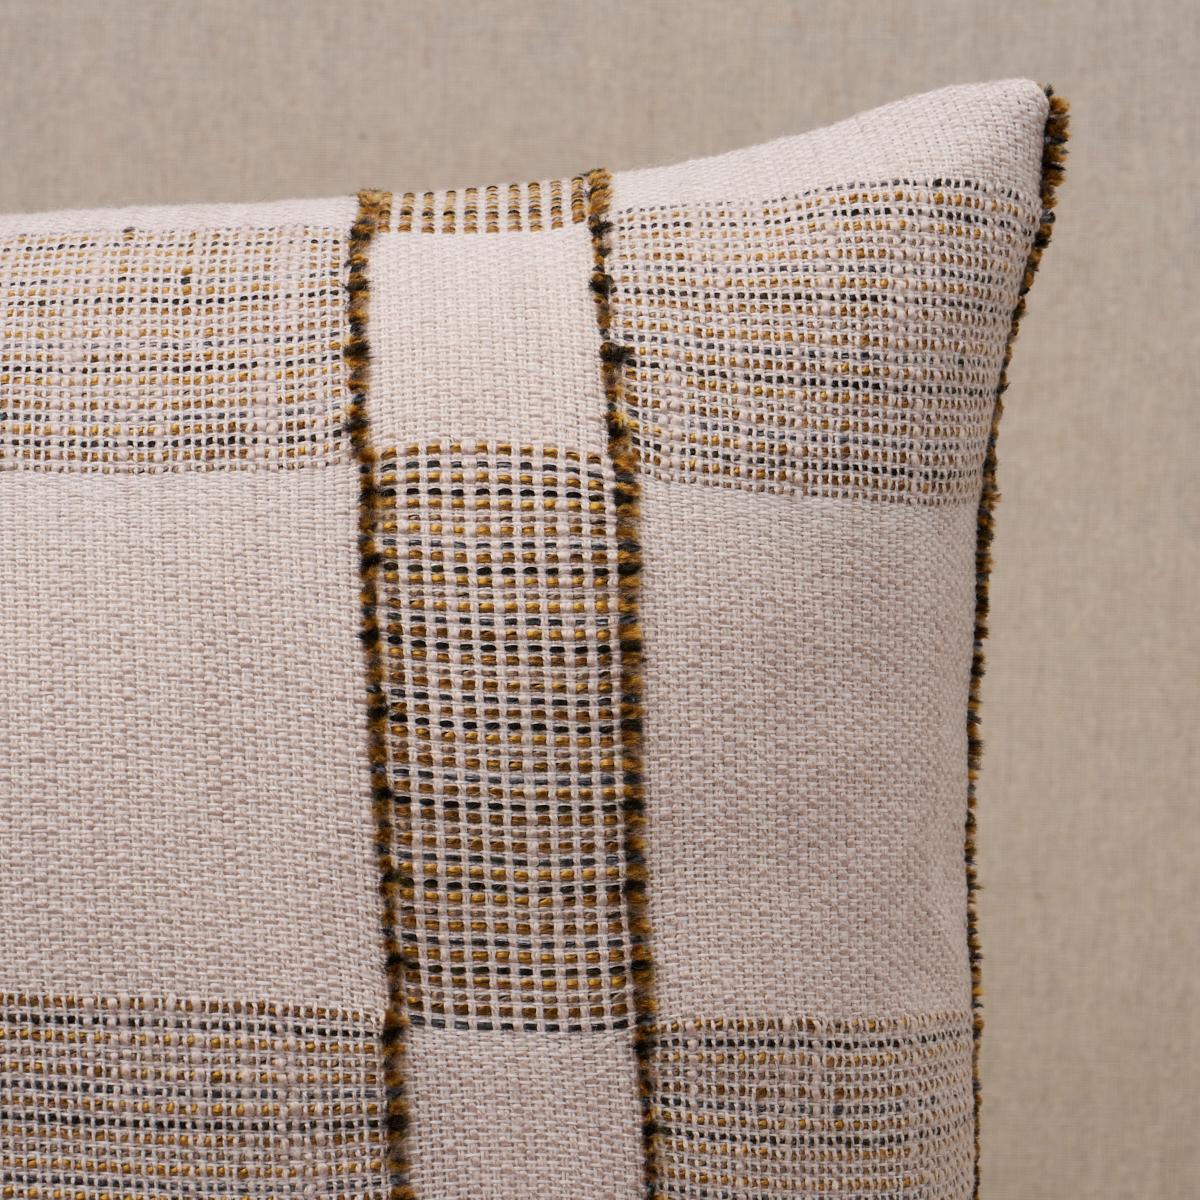 This pillow features Elko Plaid with a knife edge finish. The asymmetrical design and unexpected fringe detailing shows the hand of the maker in this plaid. Pillow includes a feather/down fill insert and hidden zipper closure.
